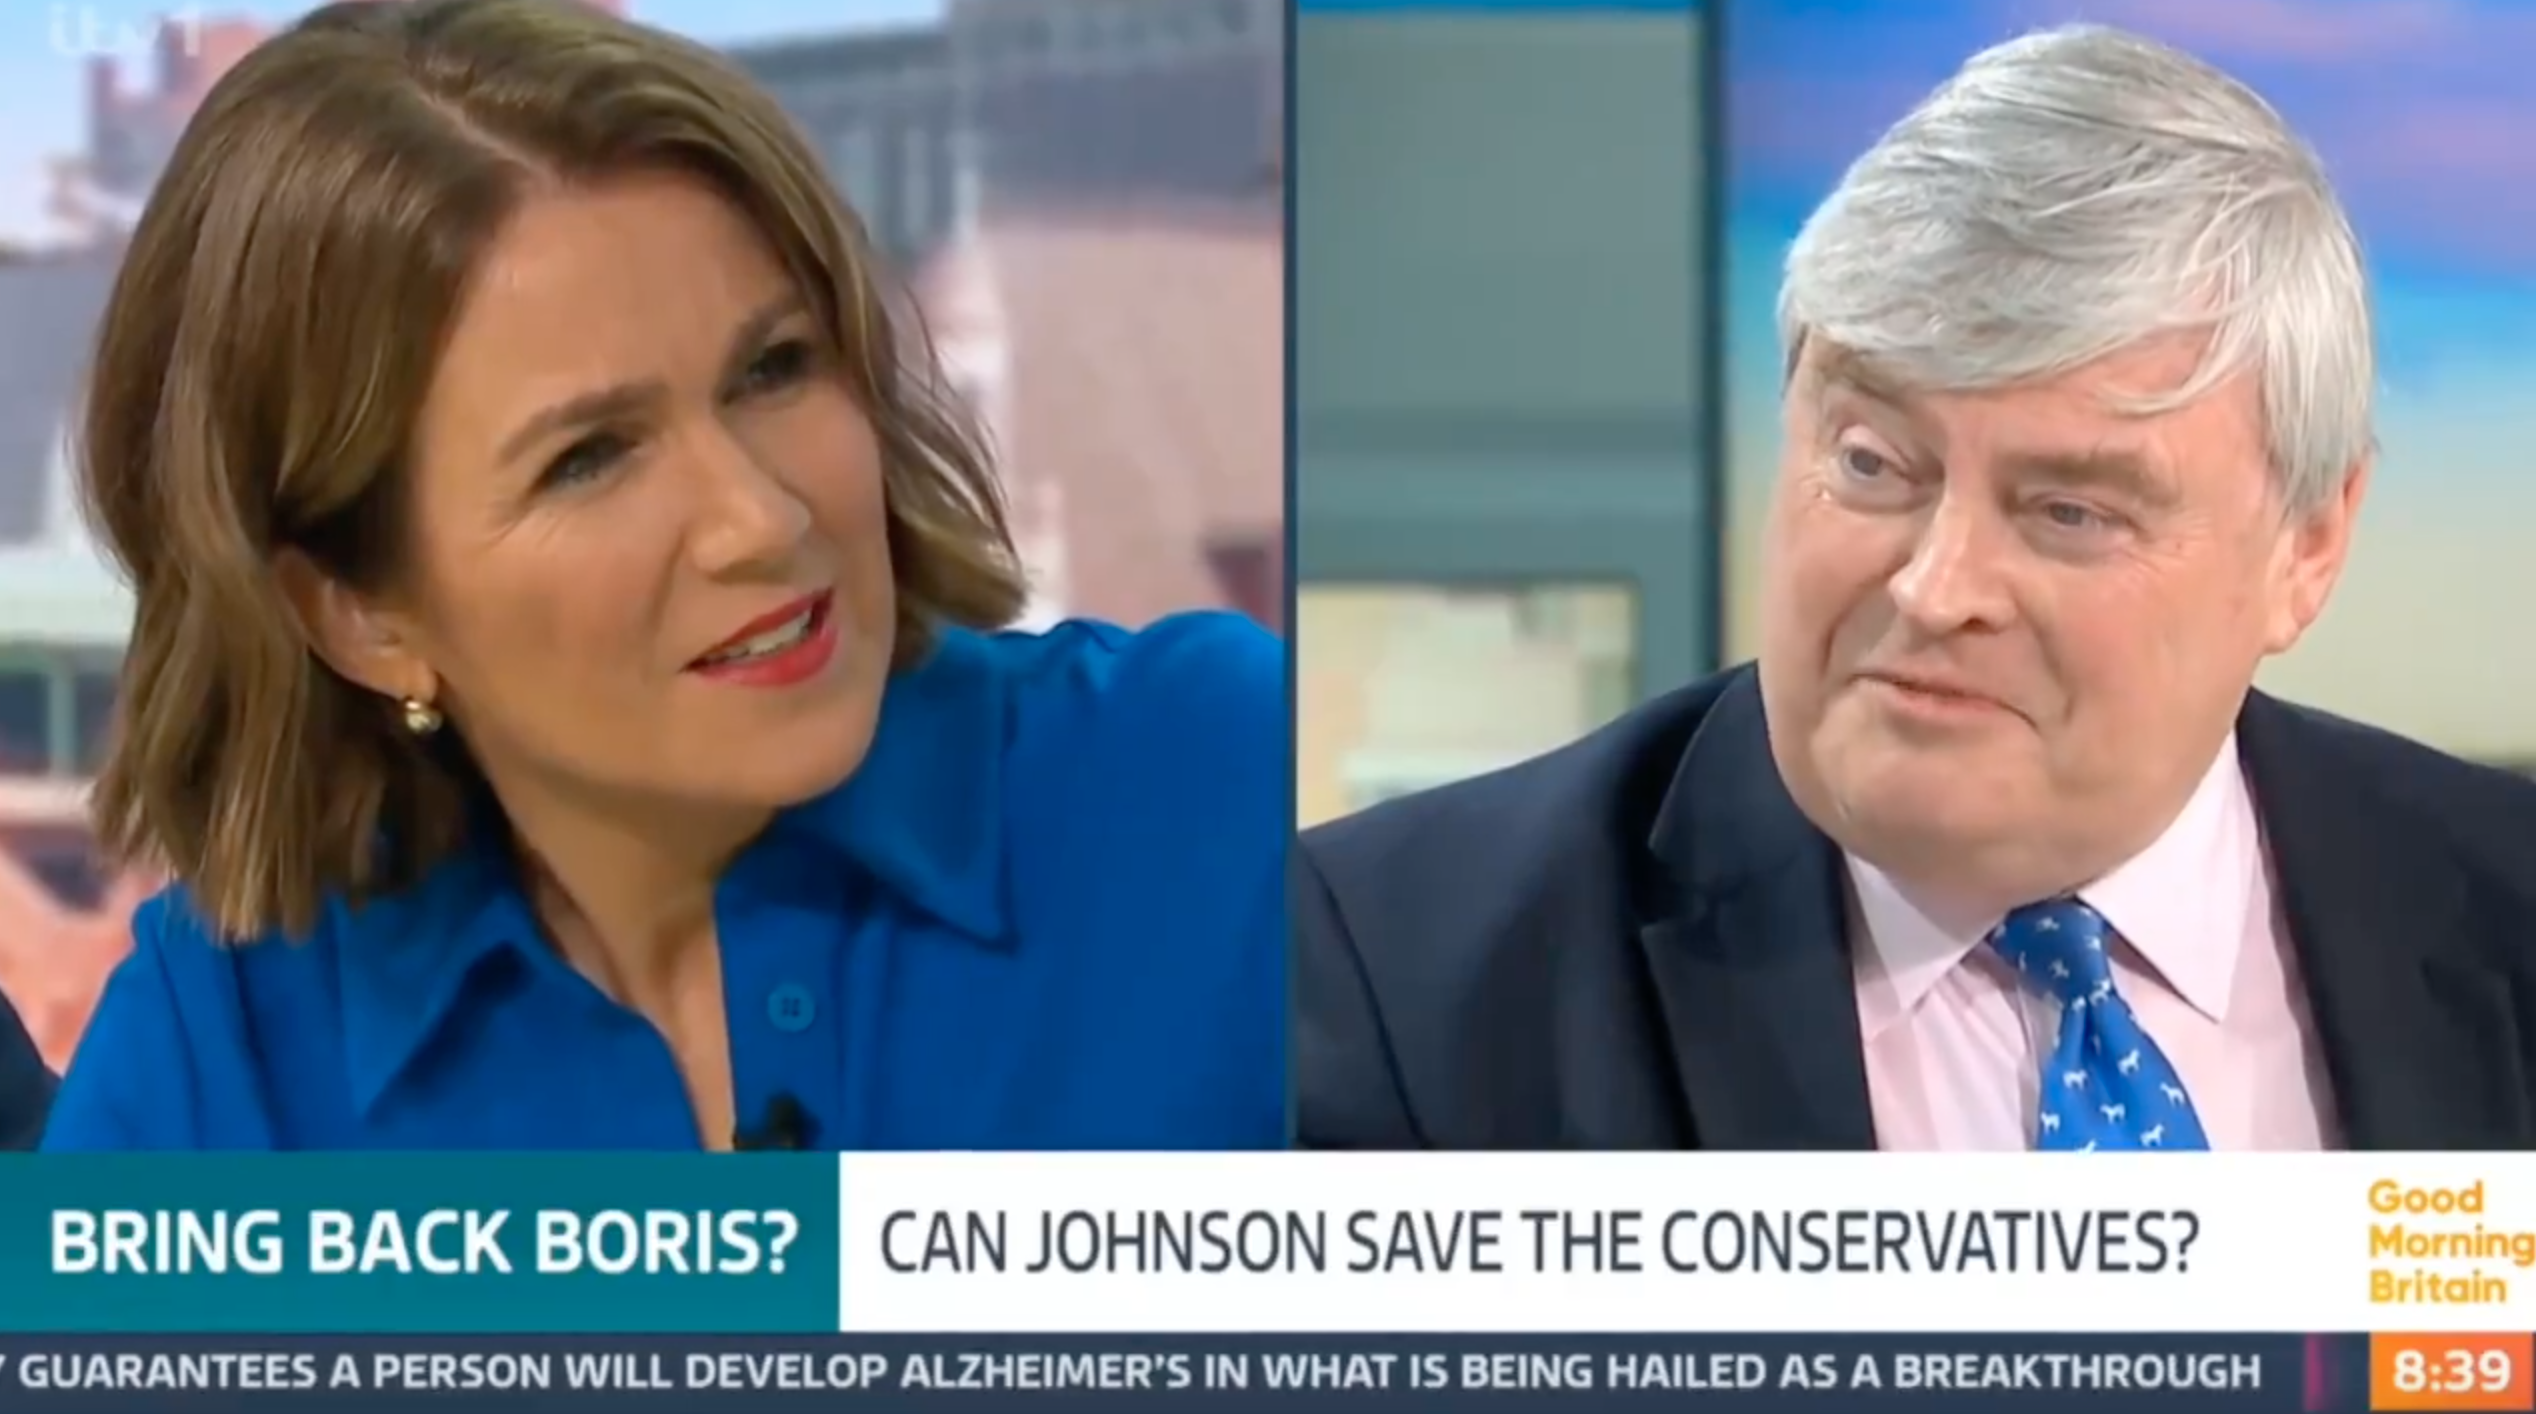 David Bannerman Calls For Boris Johnson To Be Made Tory Chair, Suggests Ex-PM ‘Set Up’ By Media Over ‘Partygate...